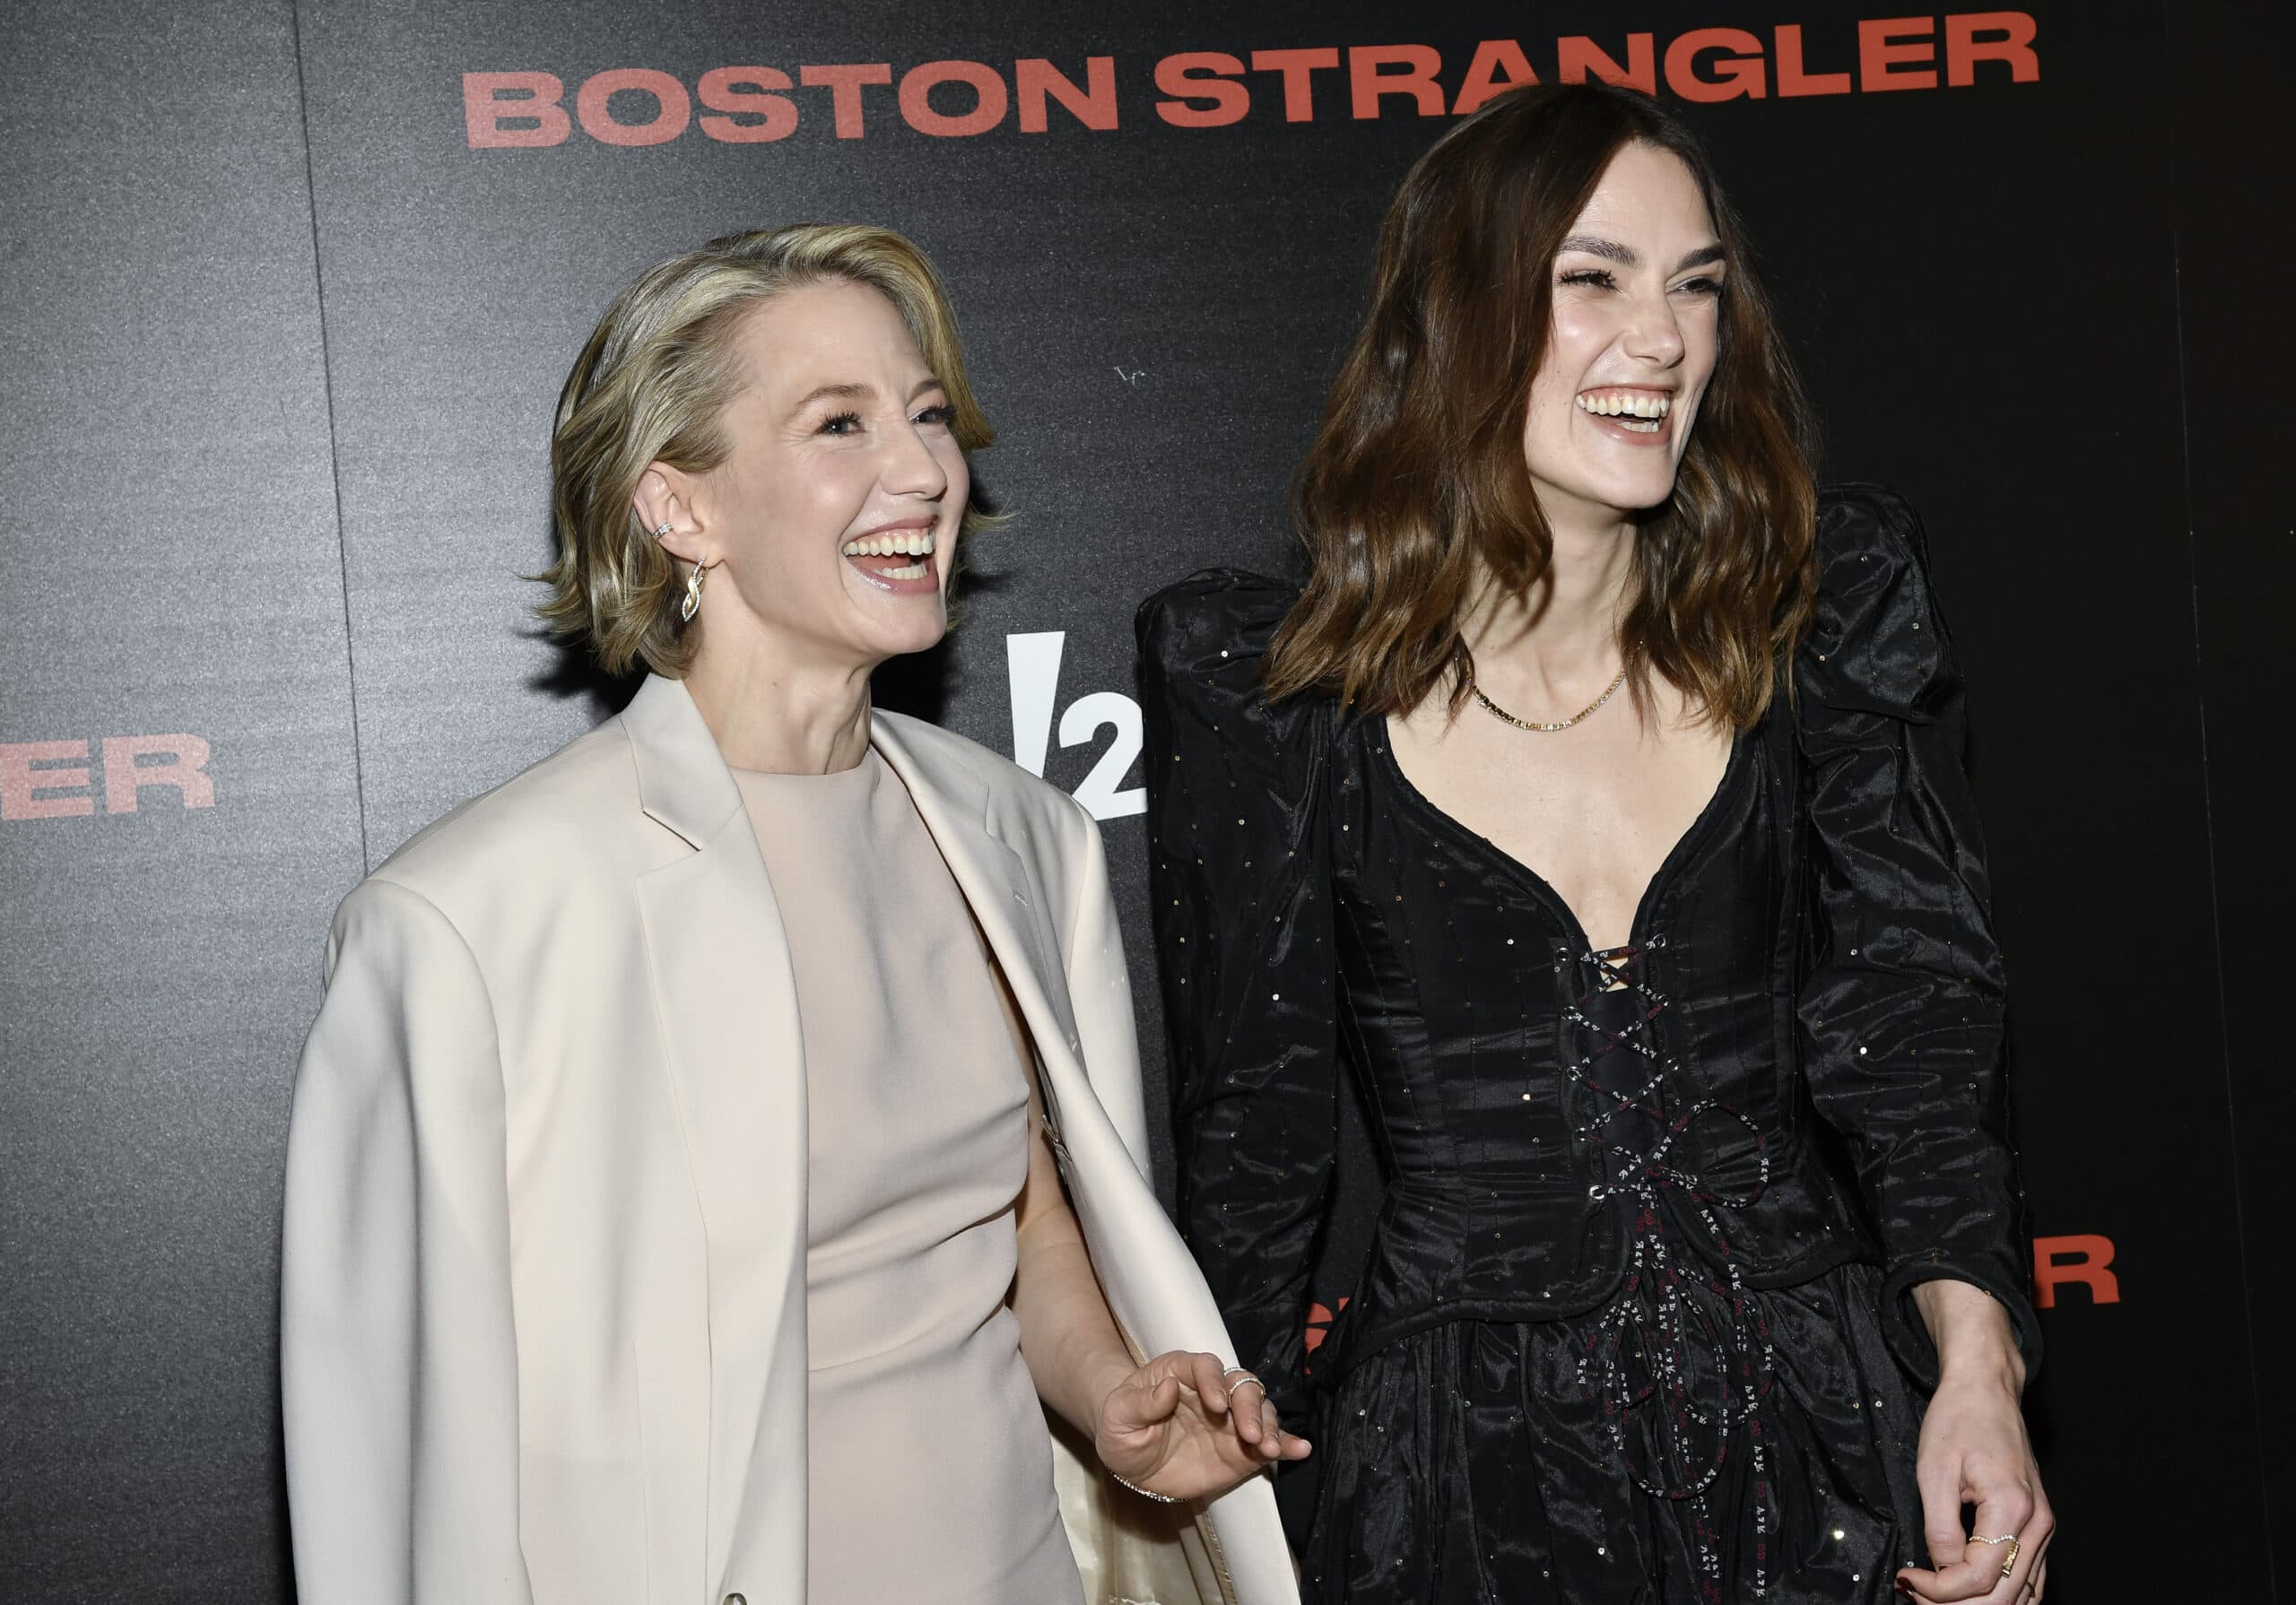 Carrie Coon, left, and Keira Knightley attend a special screening of &quot;Boston Strangler&quot; at the Museum of Modern Art on Tuesday, March 14, 2023, in New York. (Evan Agostini/Invision/AP)